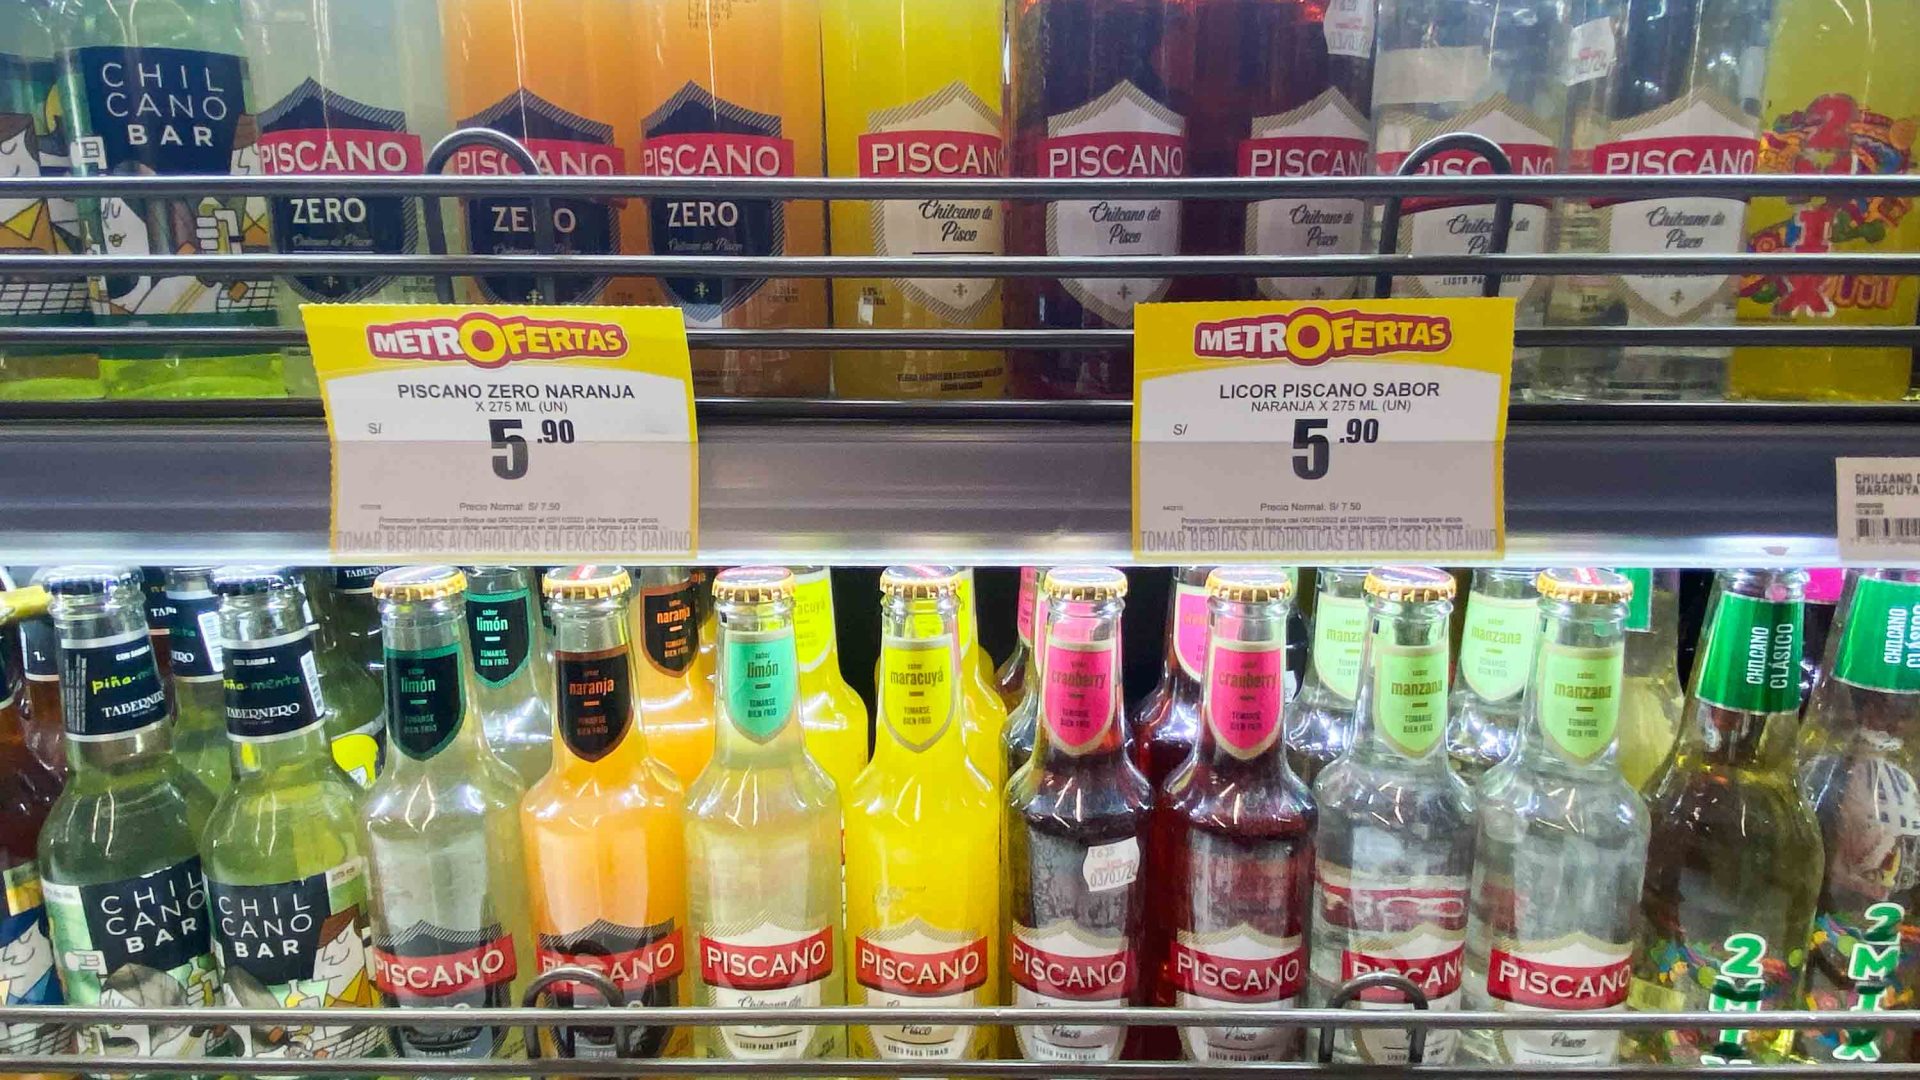 Pisco products in the supermarket.